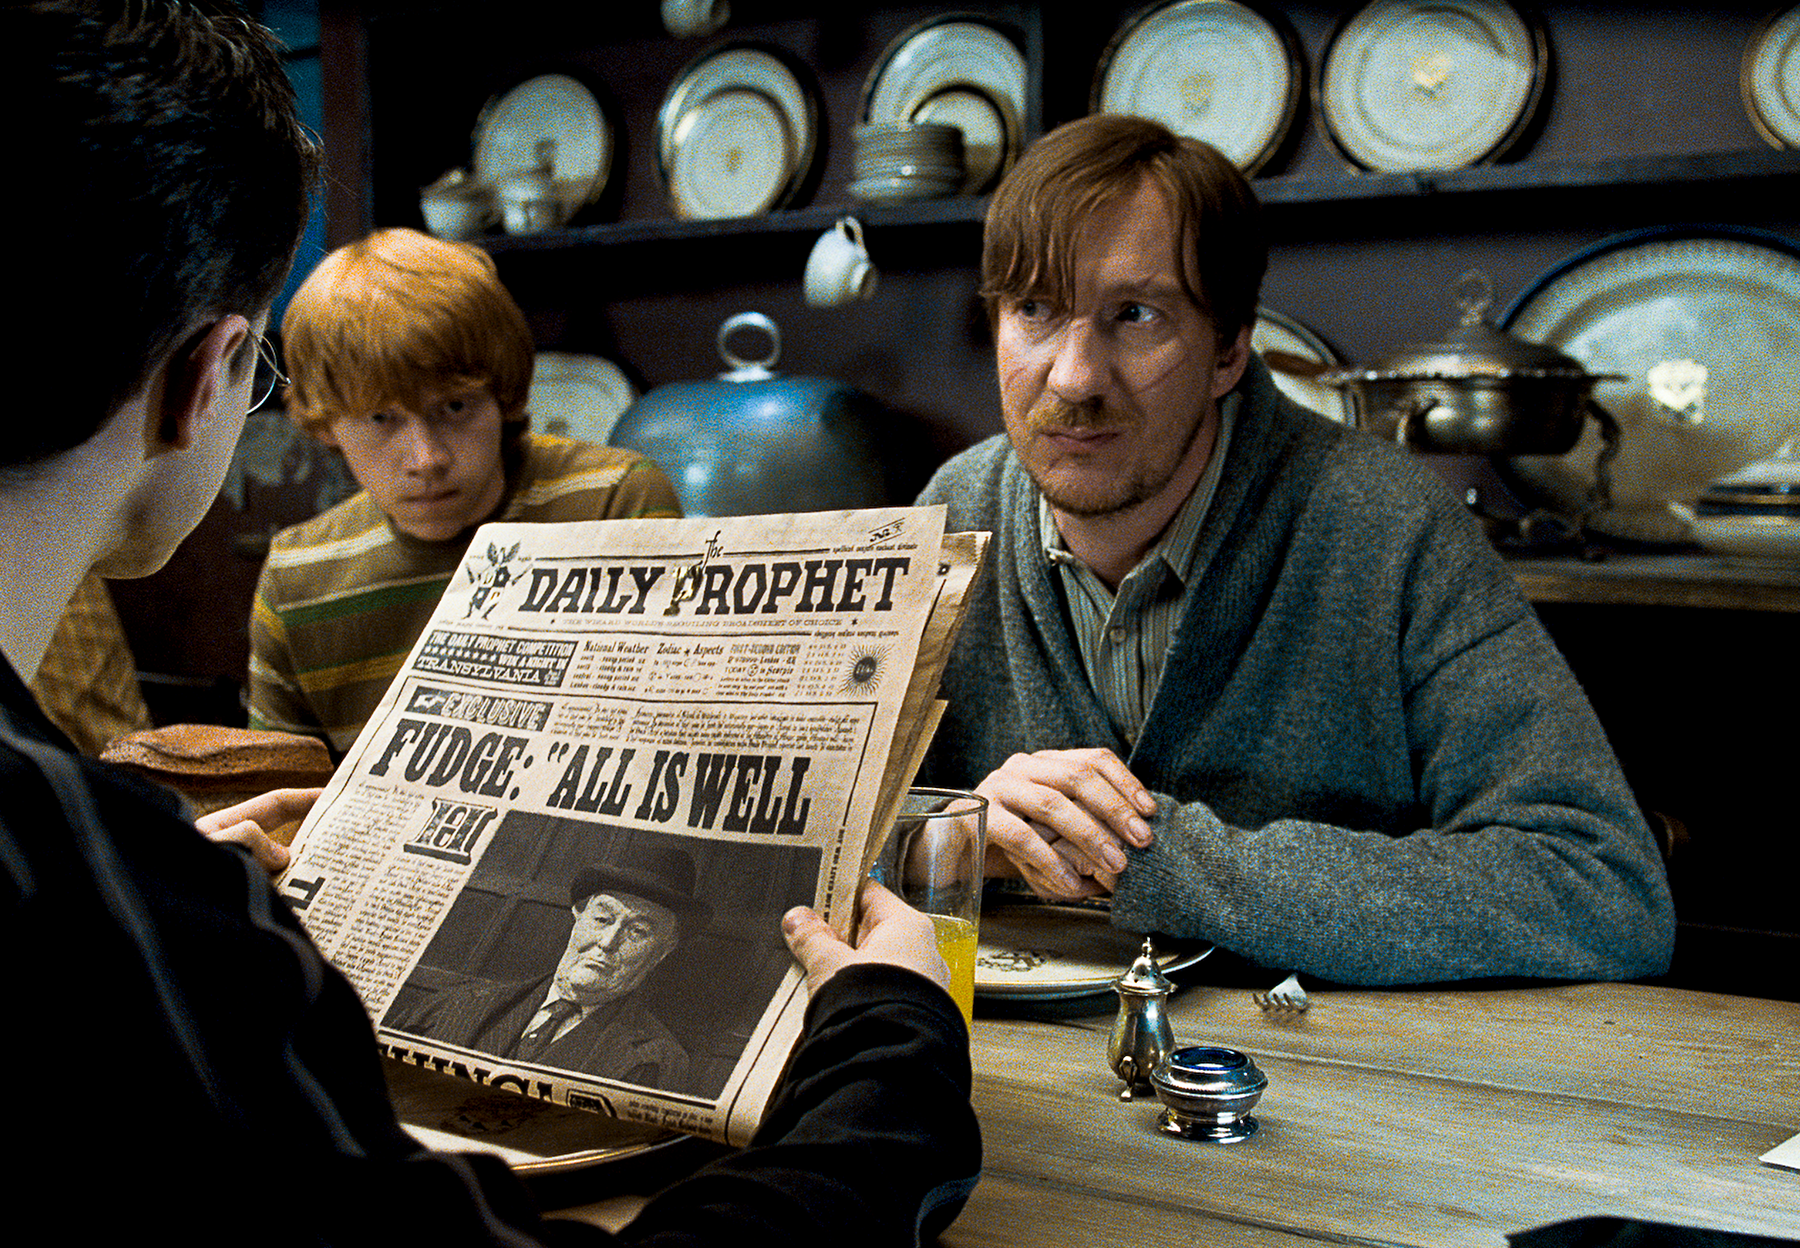 Category:Newspapers, Harry Potter Wiki